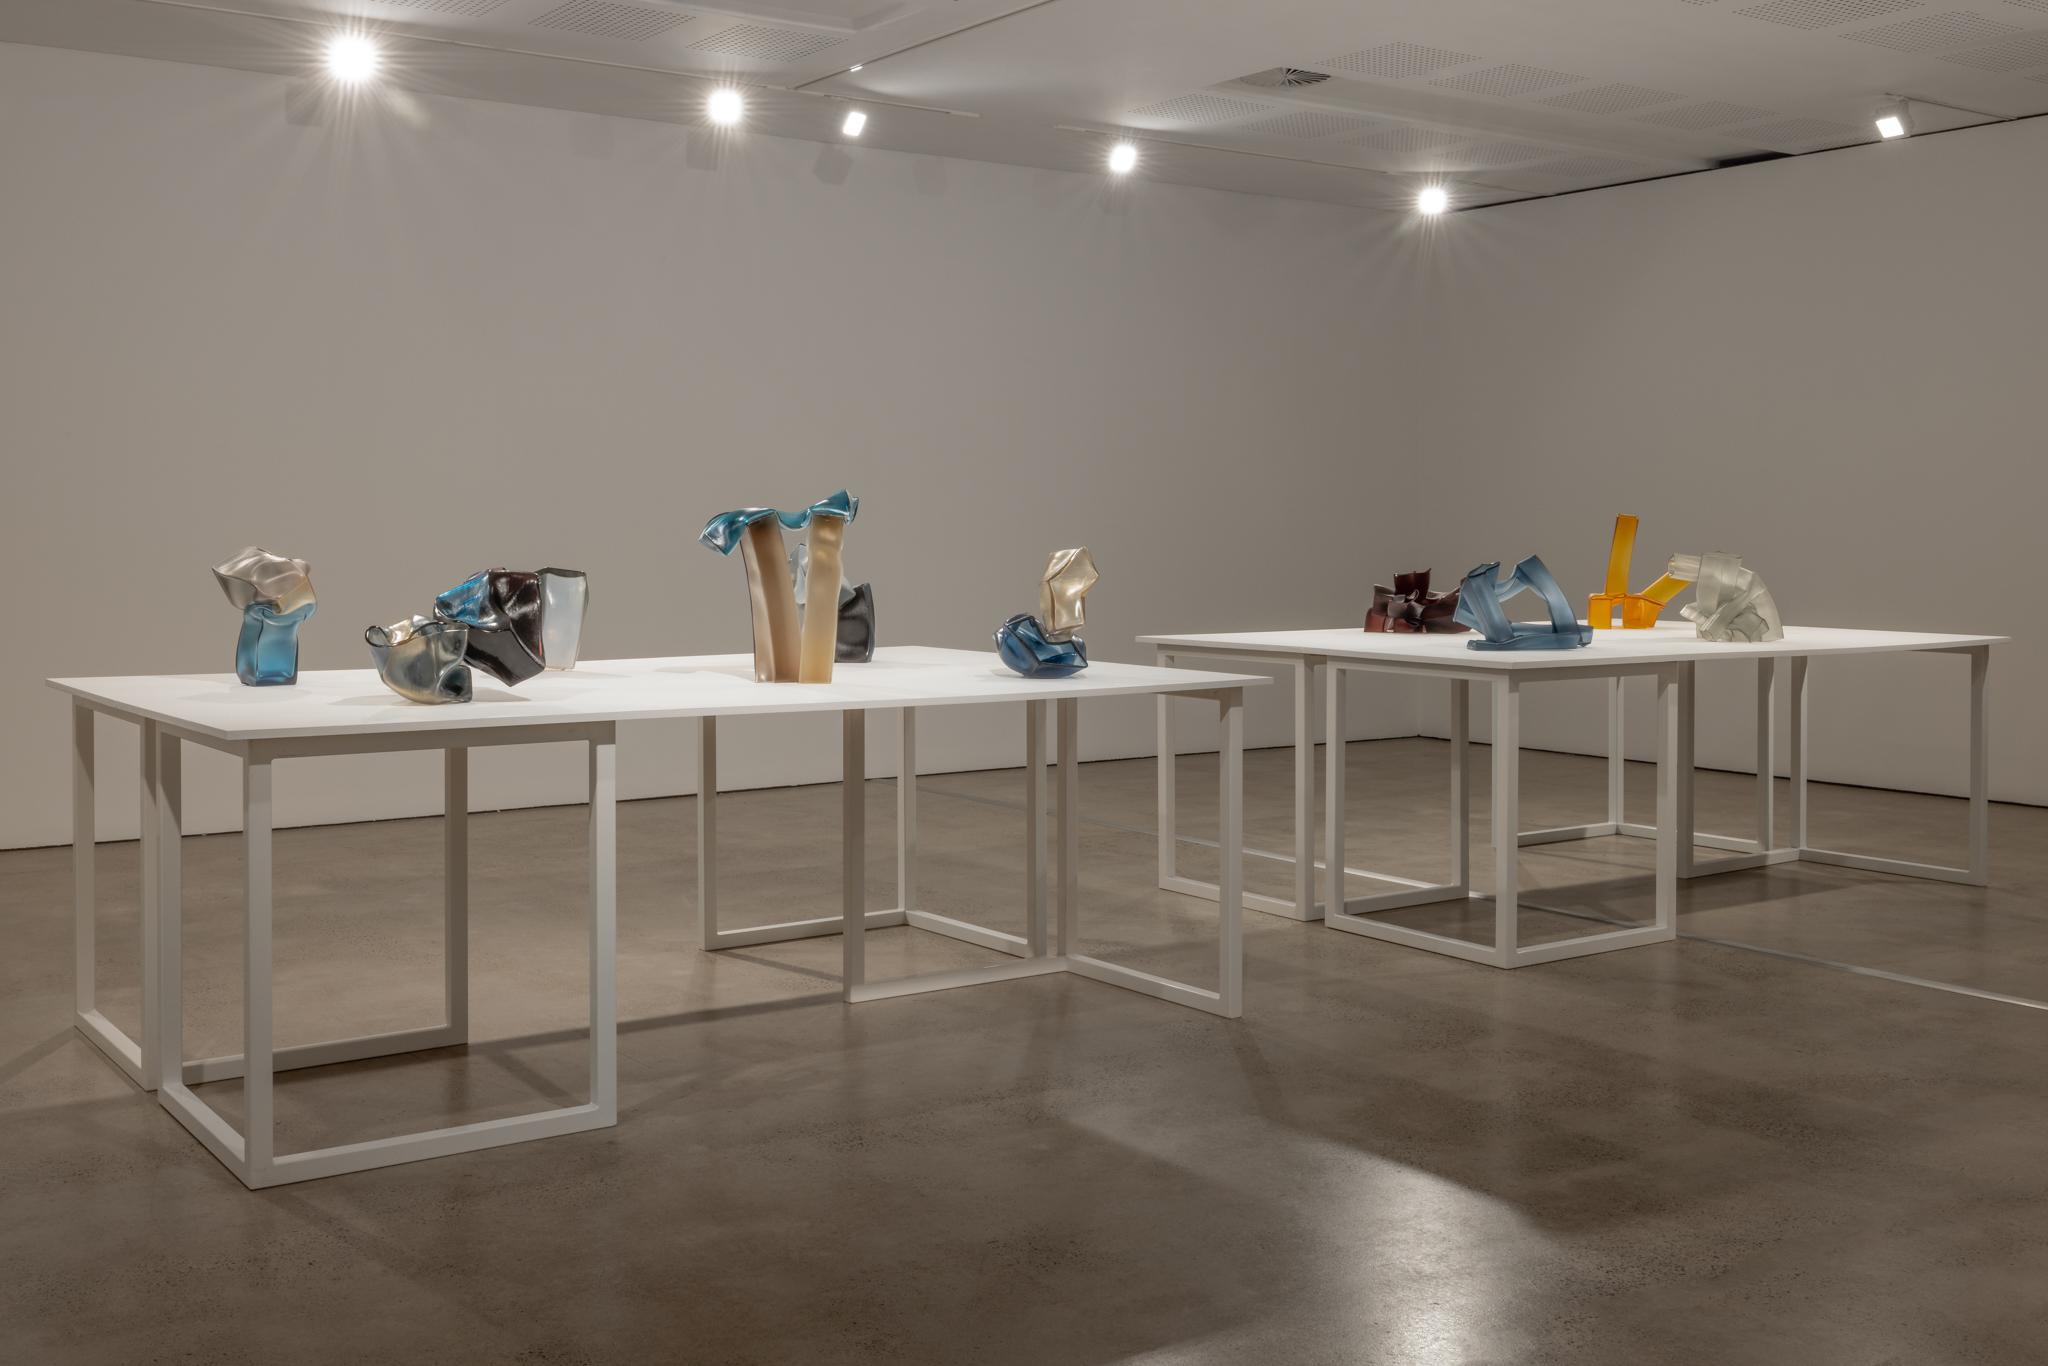 unswgalleries_glass_181022_credit_jacquiemanning-5.jpg